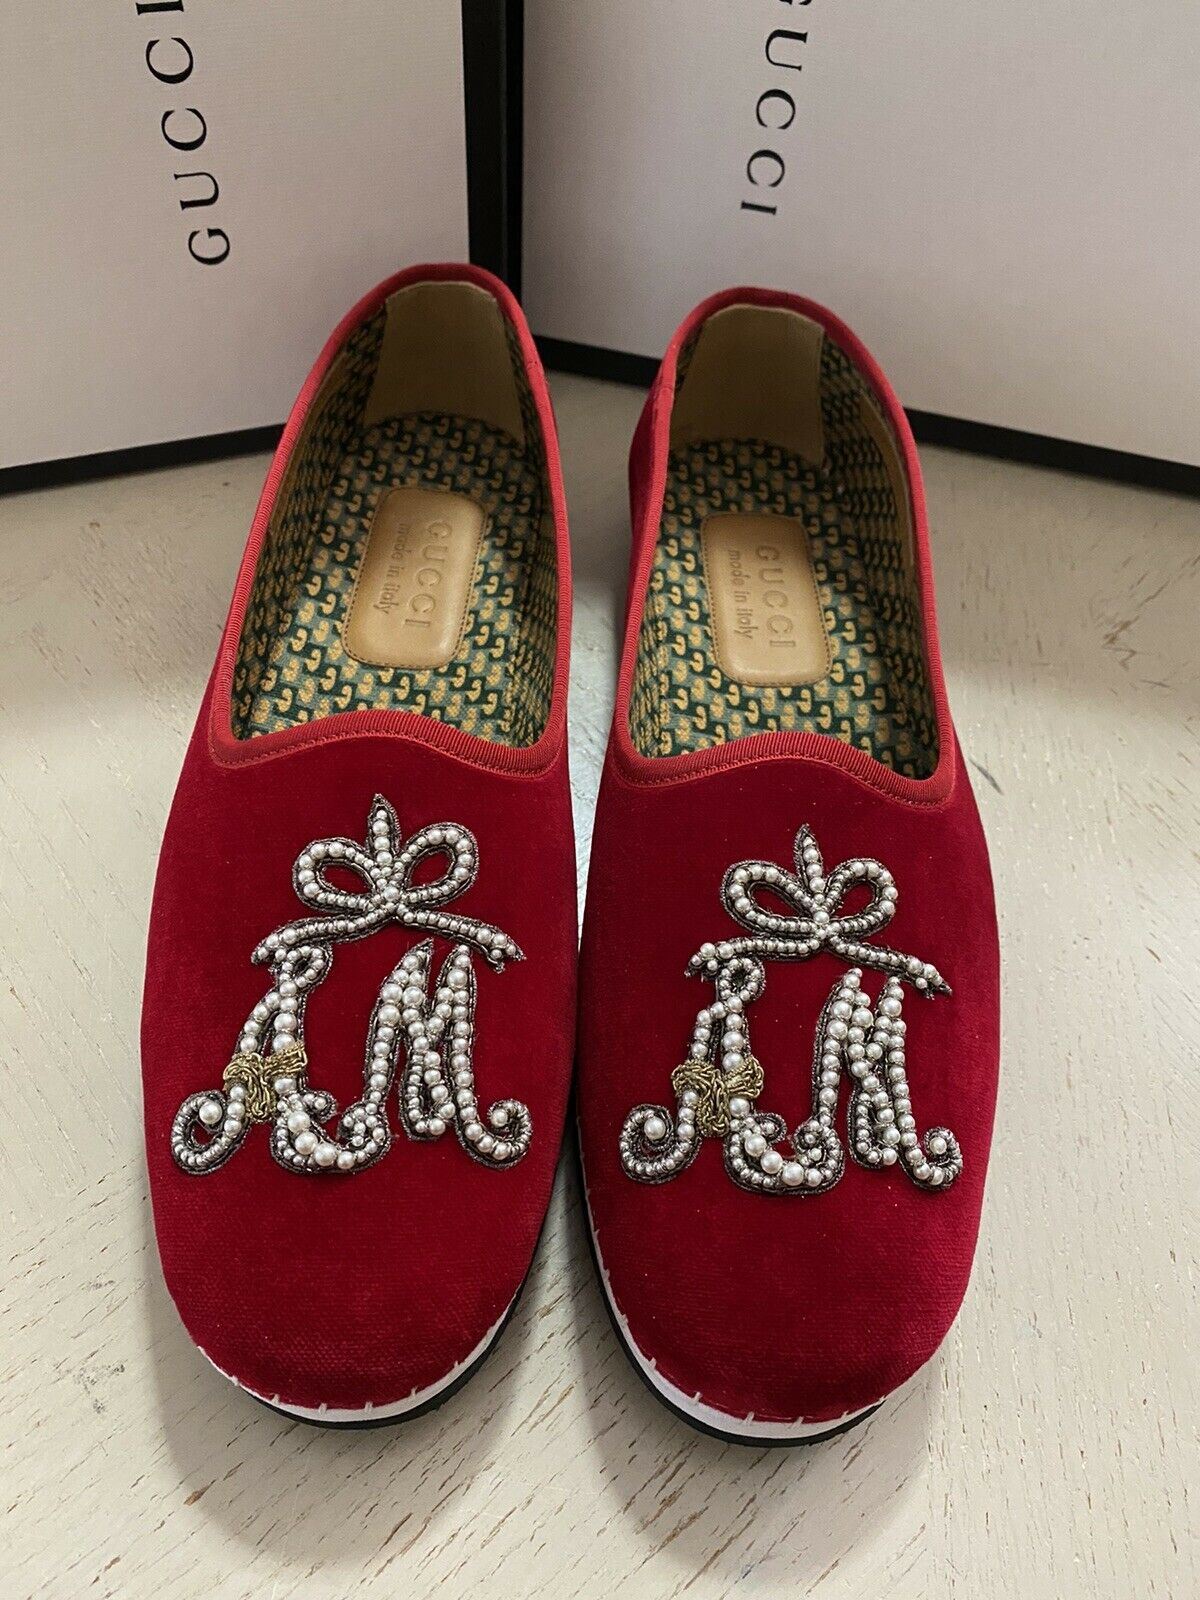 NIB $980 Gucci Mens Velvet Loafers Shoes Red 7.5 US / 6.5 UK